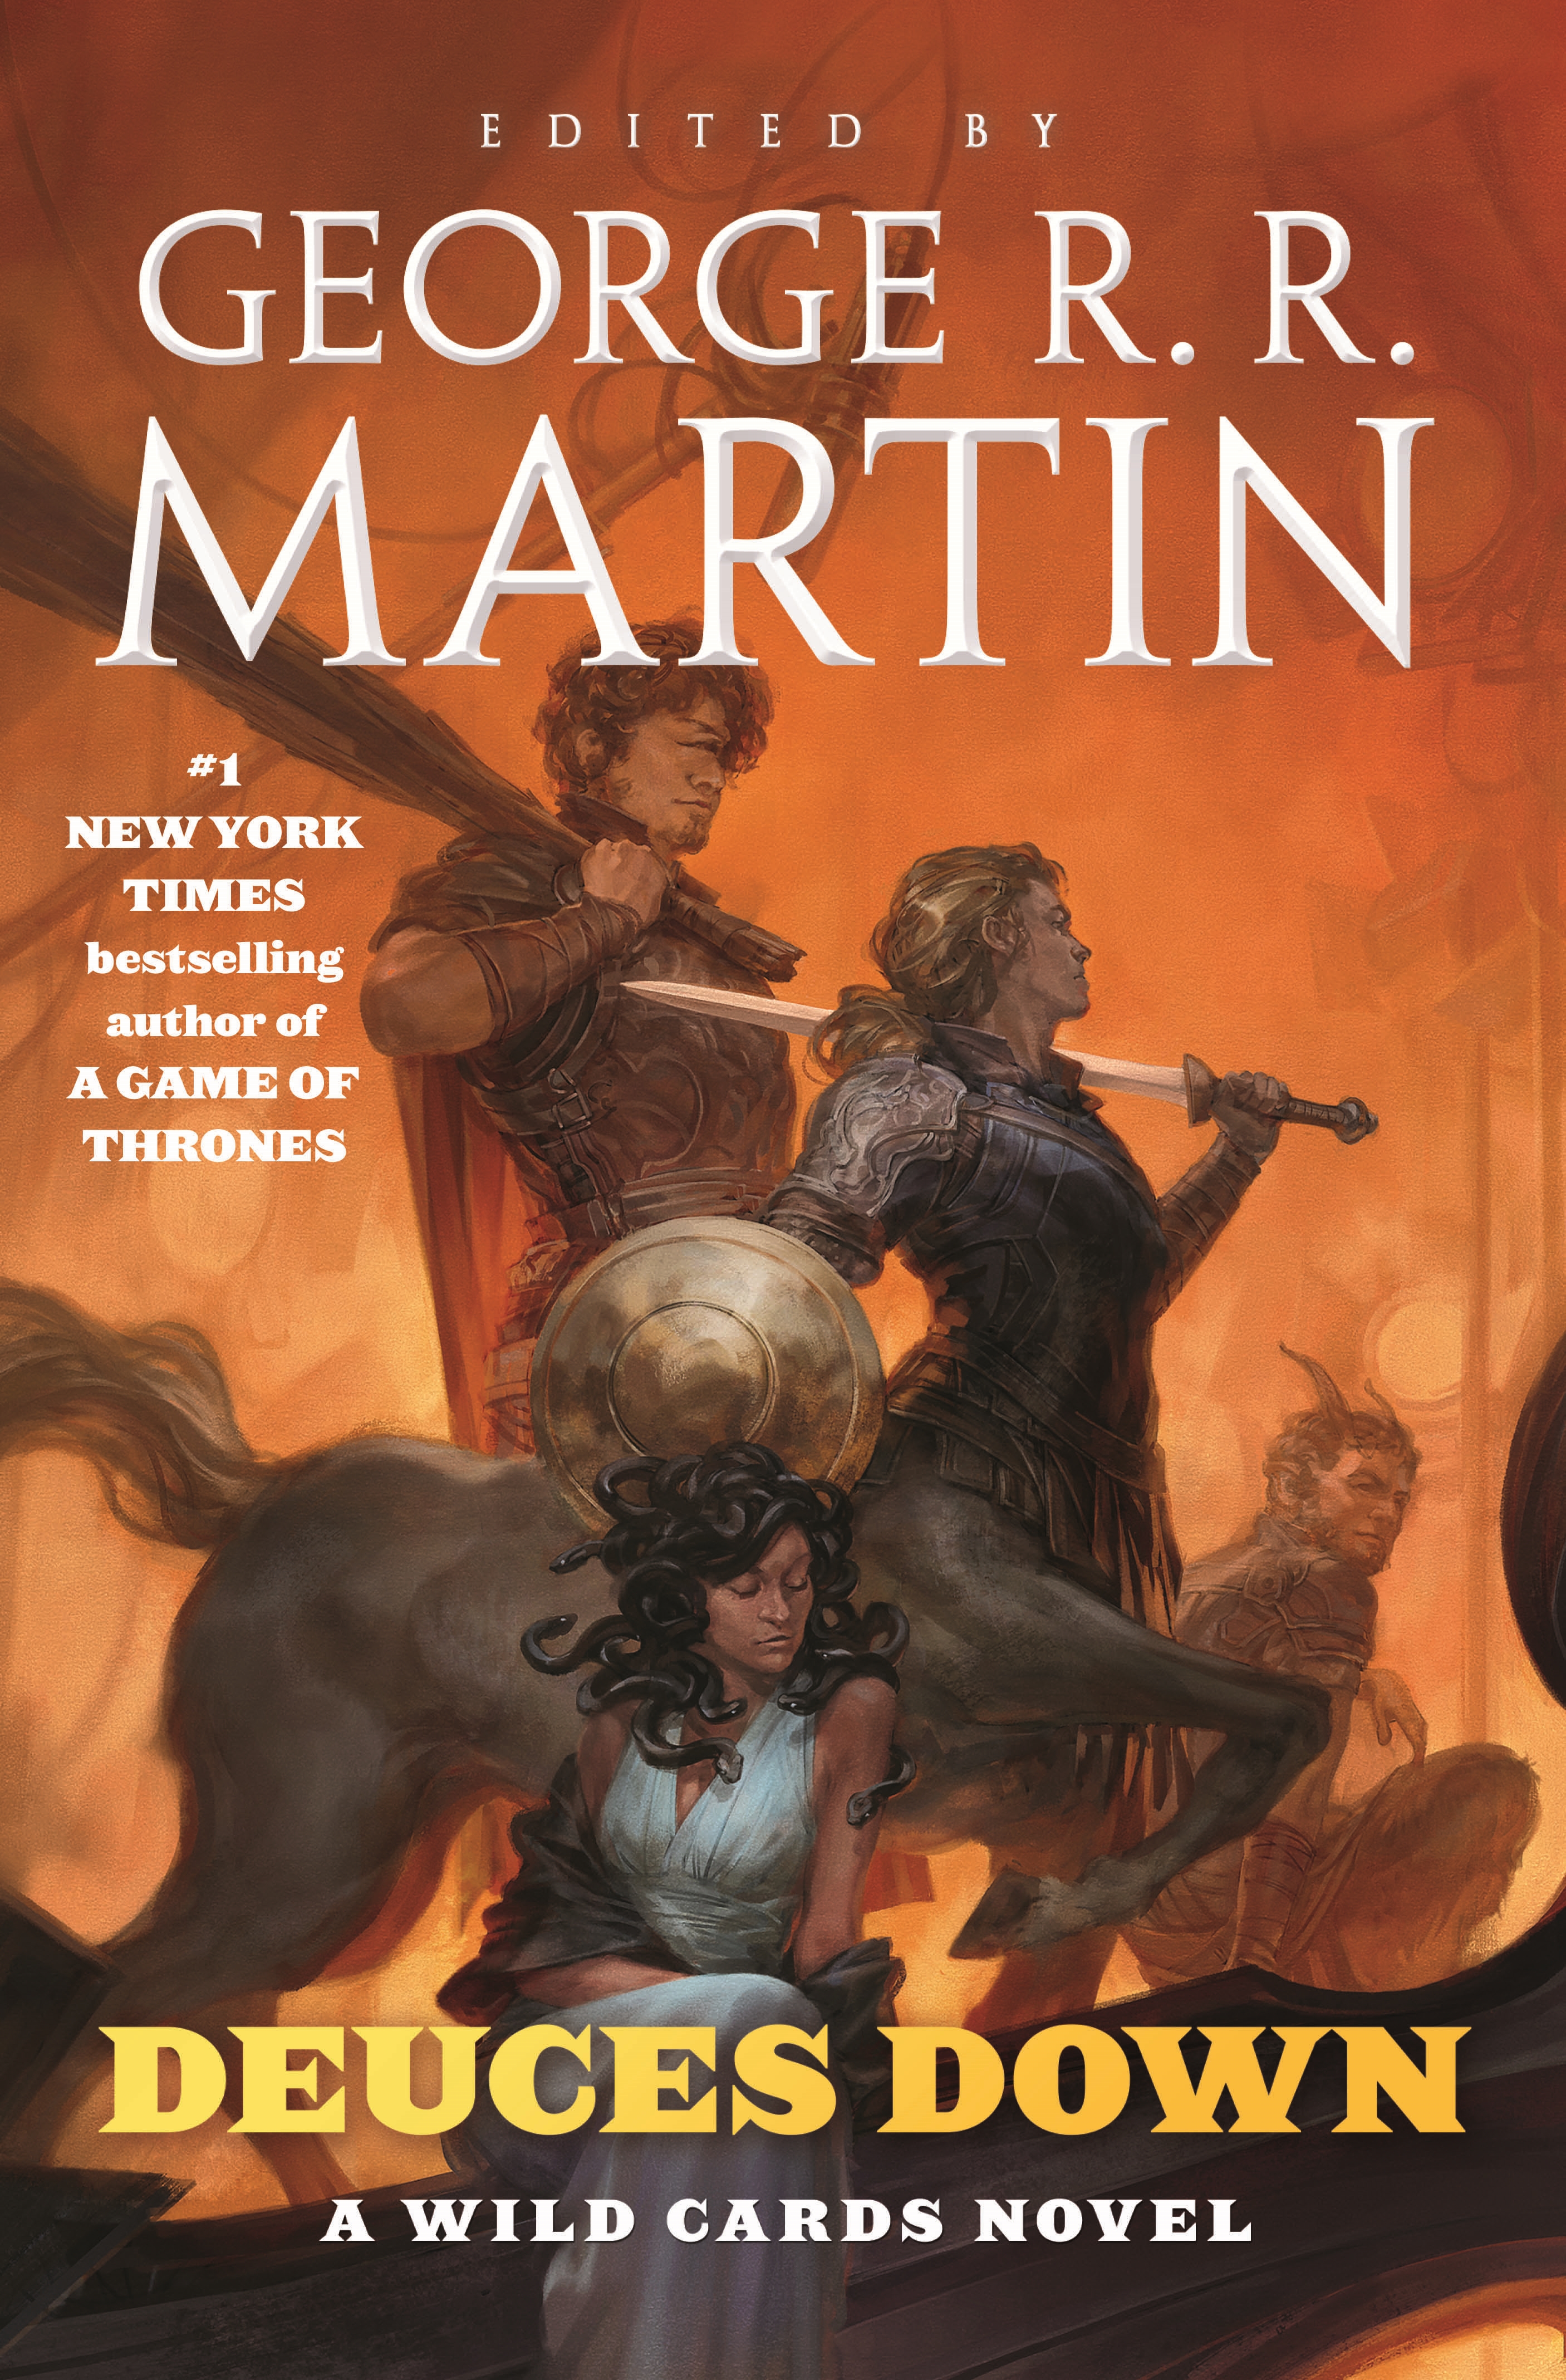 A Game of Thrones: Clash of Kings #11 Reviews